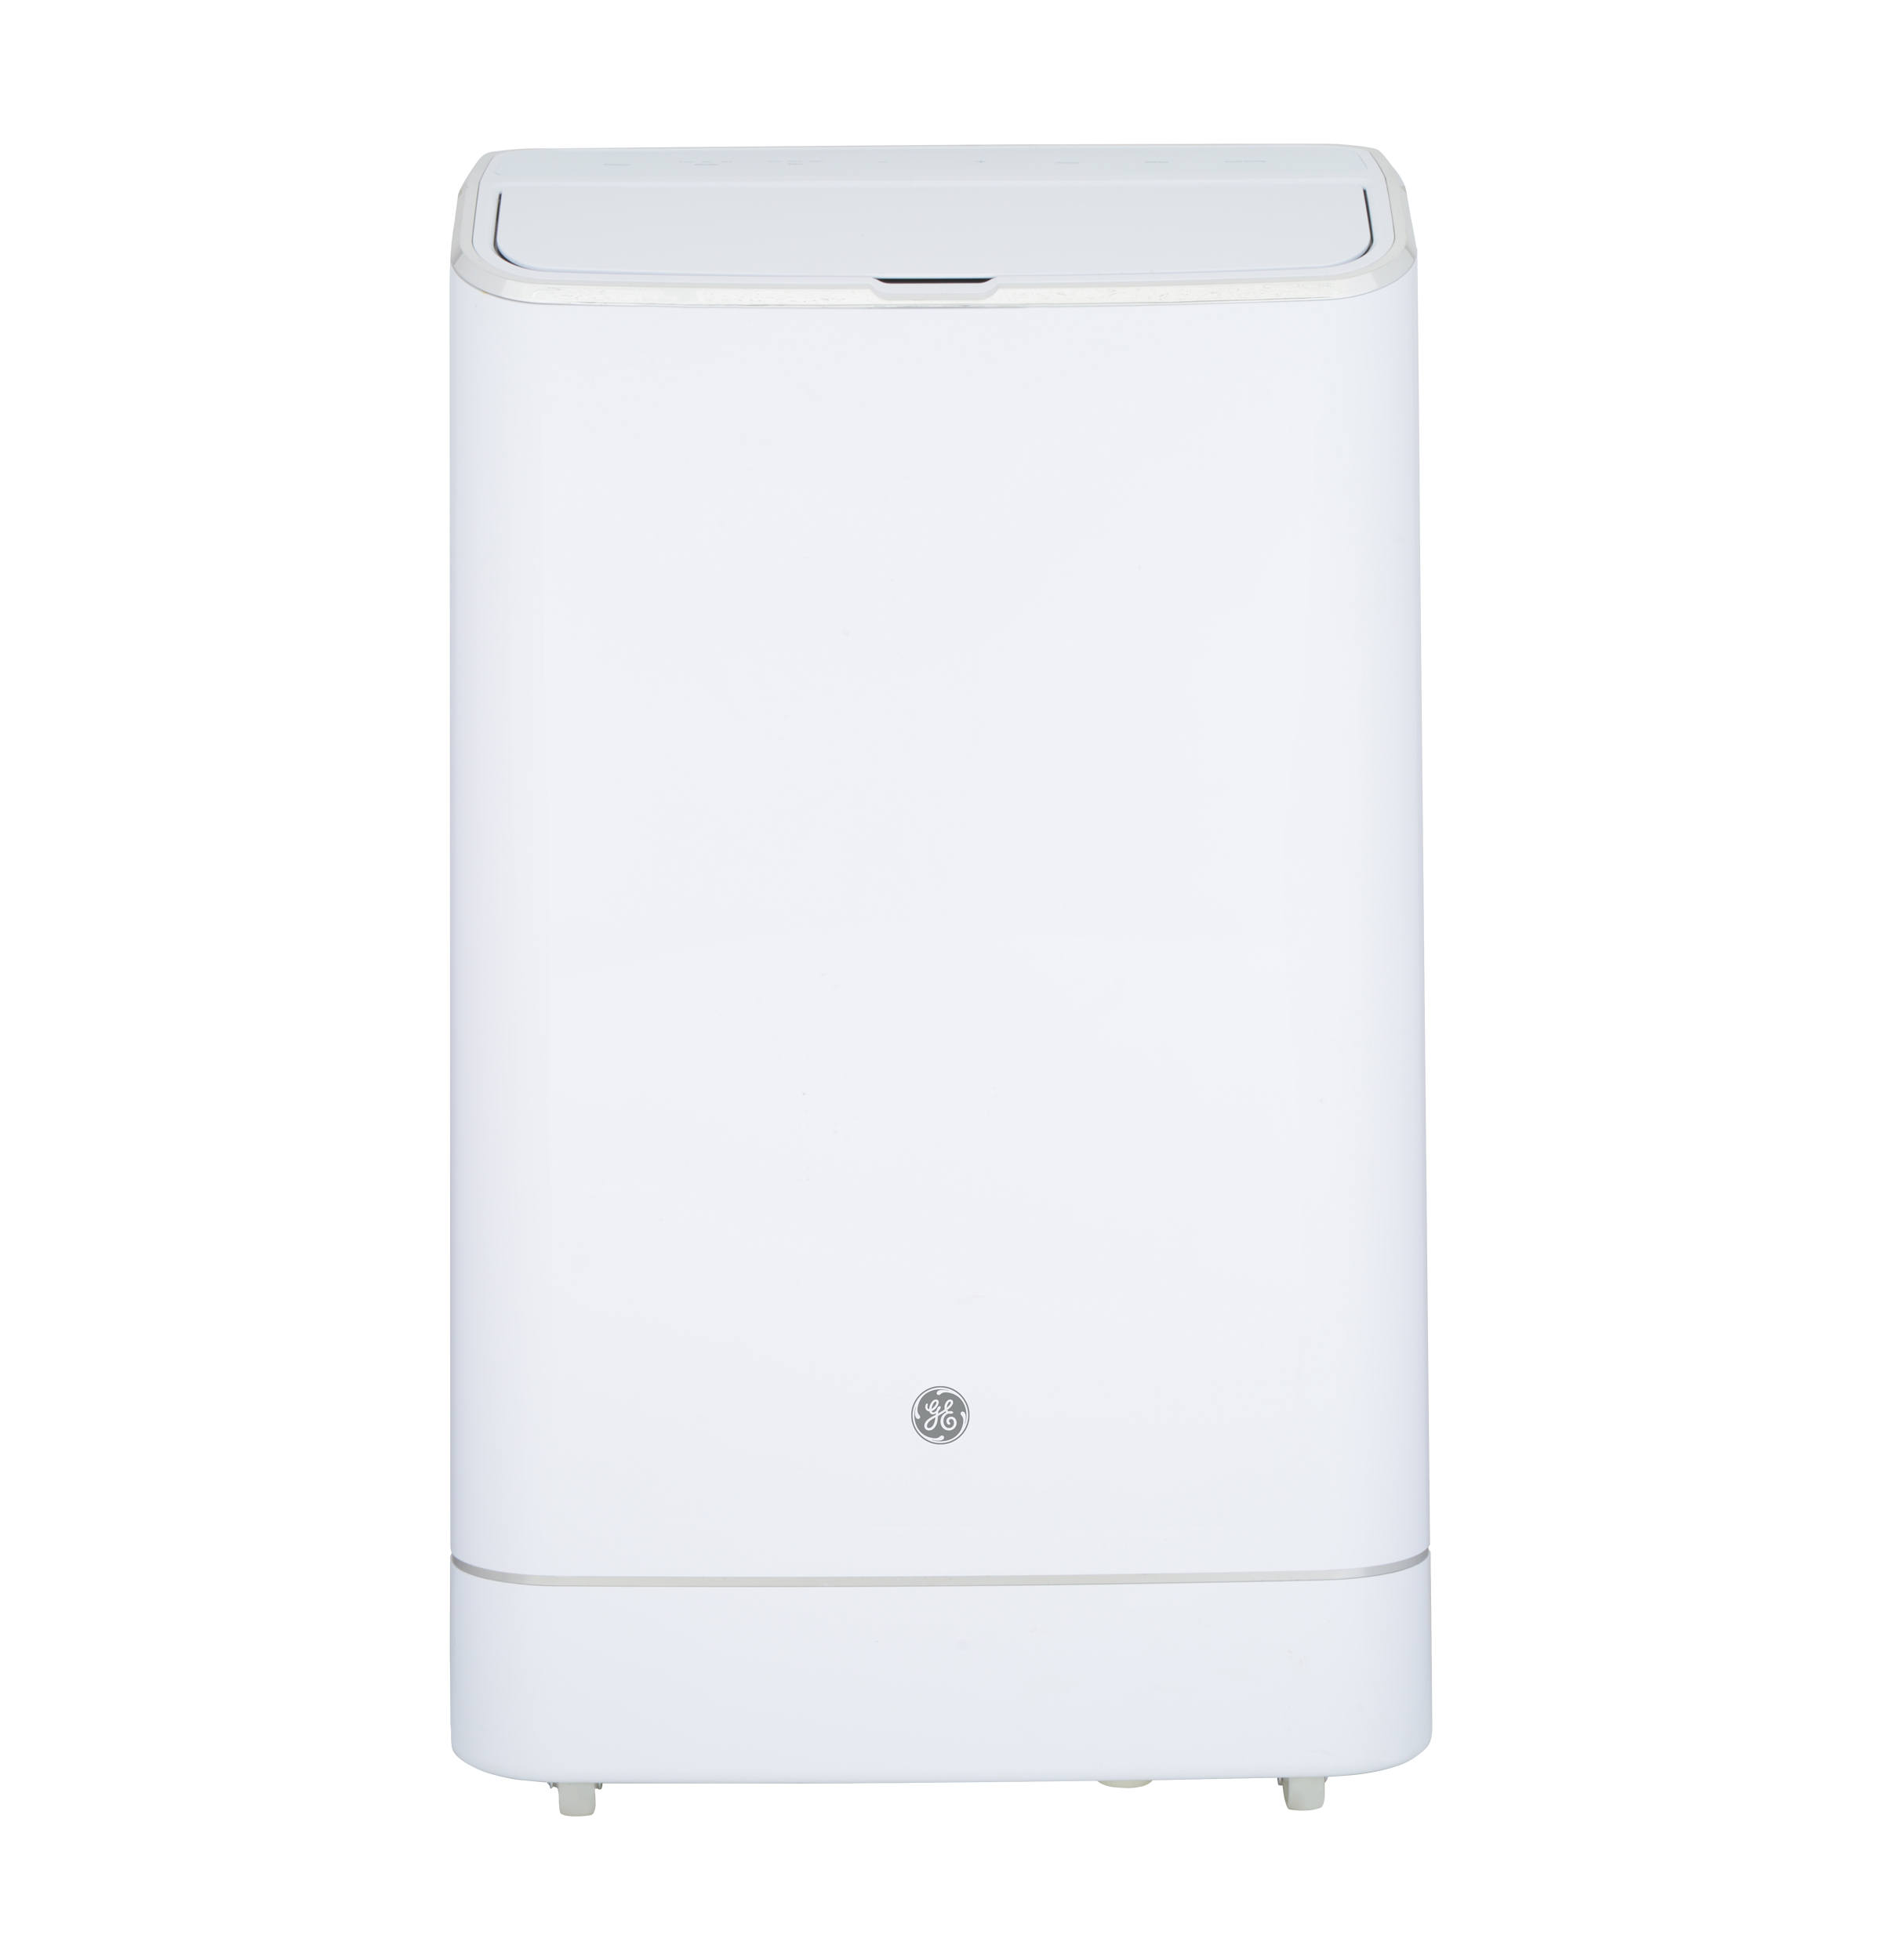 GE® 10,000 BTU Portable Air Conditioner for Medium Rooms up to 450 sq ft.